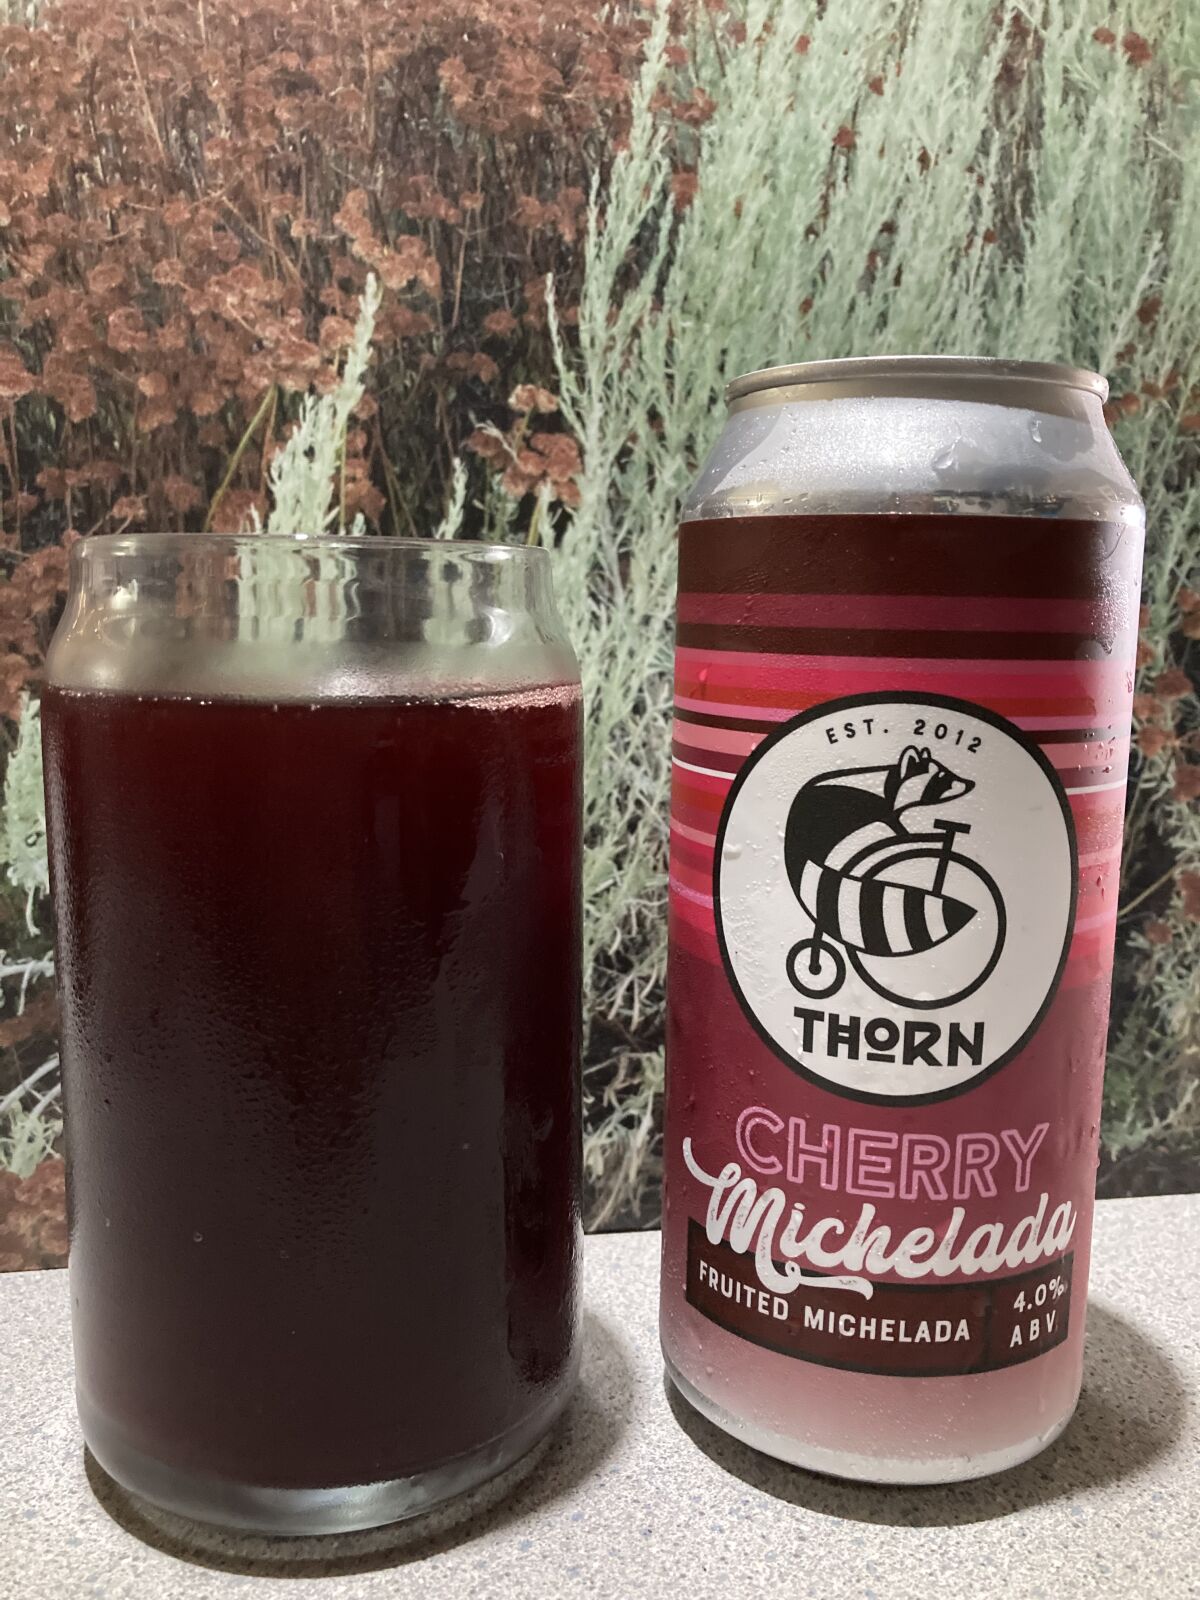 Cherry Michelada from Thorn Brewing